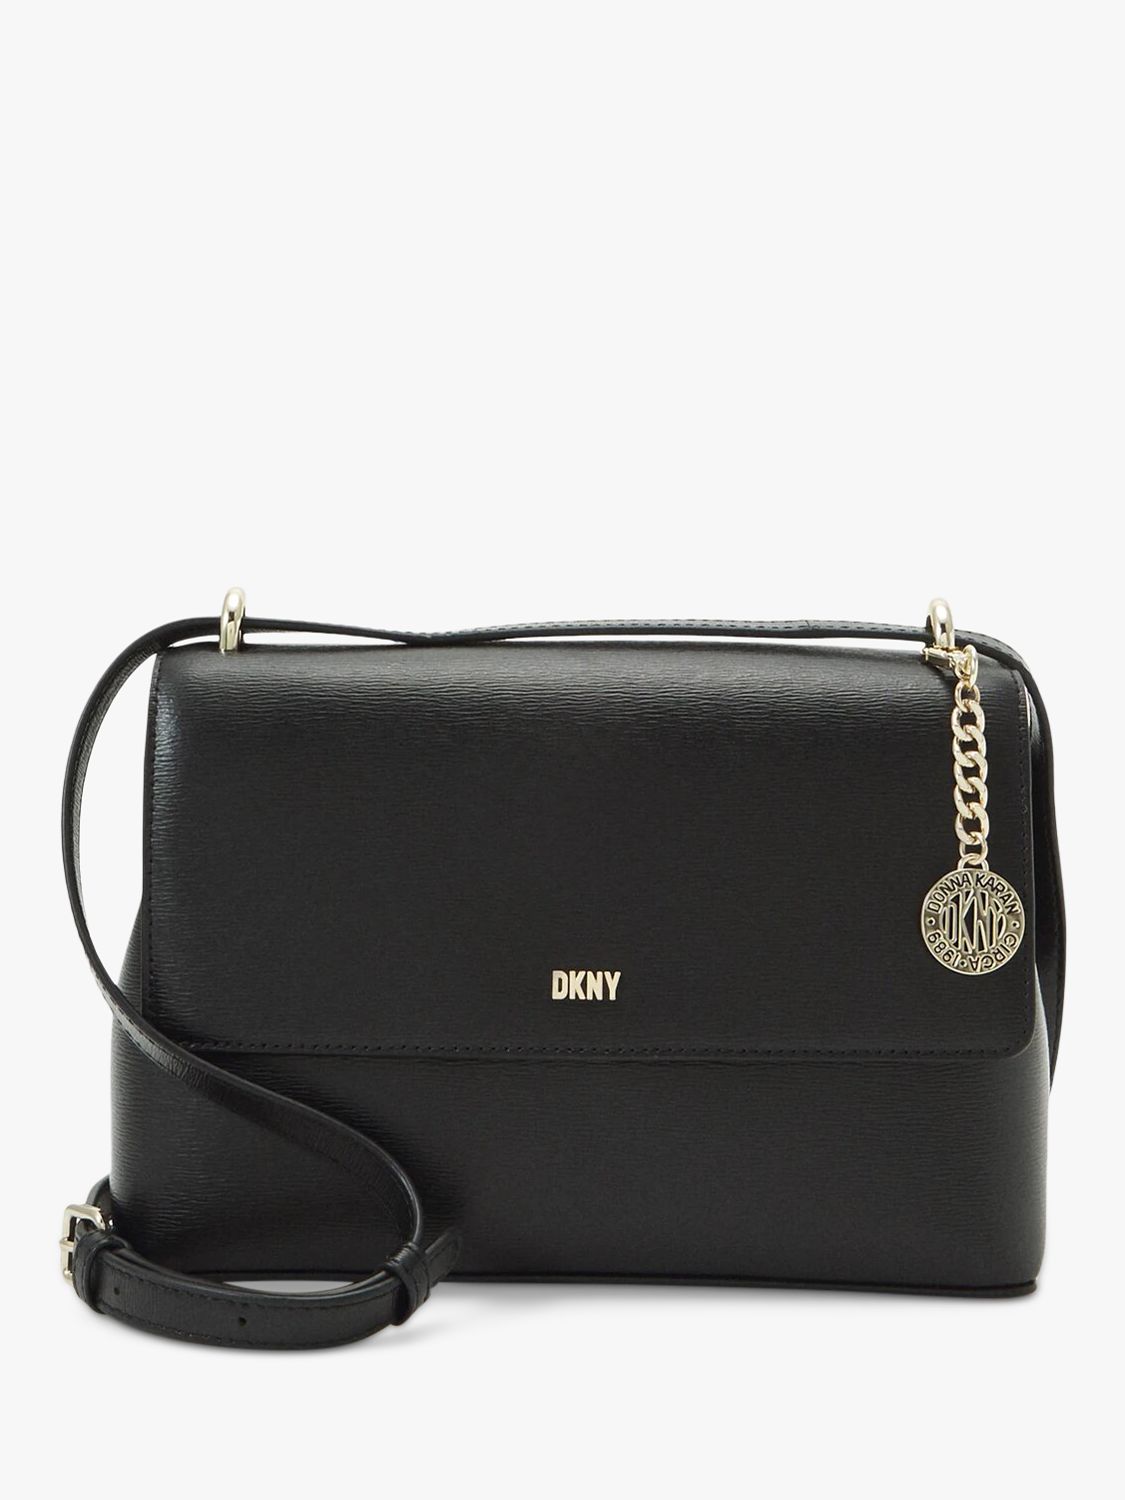 DKNY Bryant Leather Dome Satchel in Black